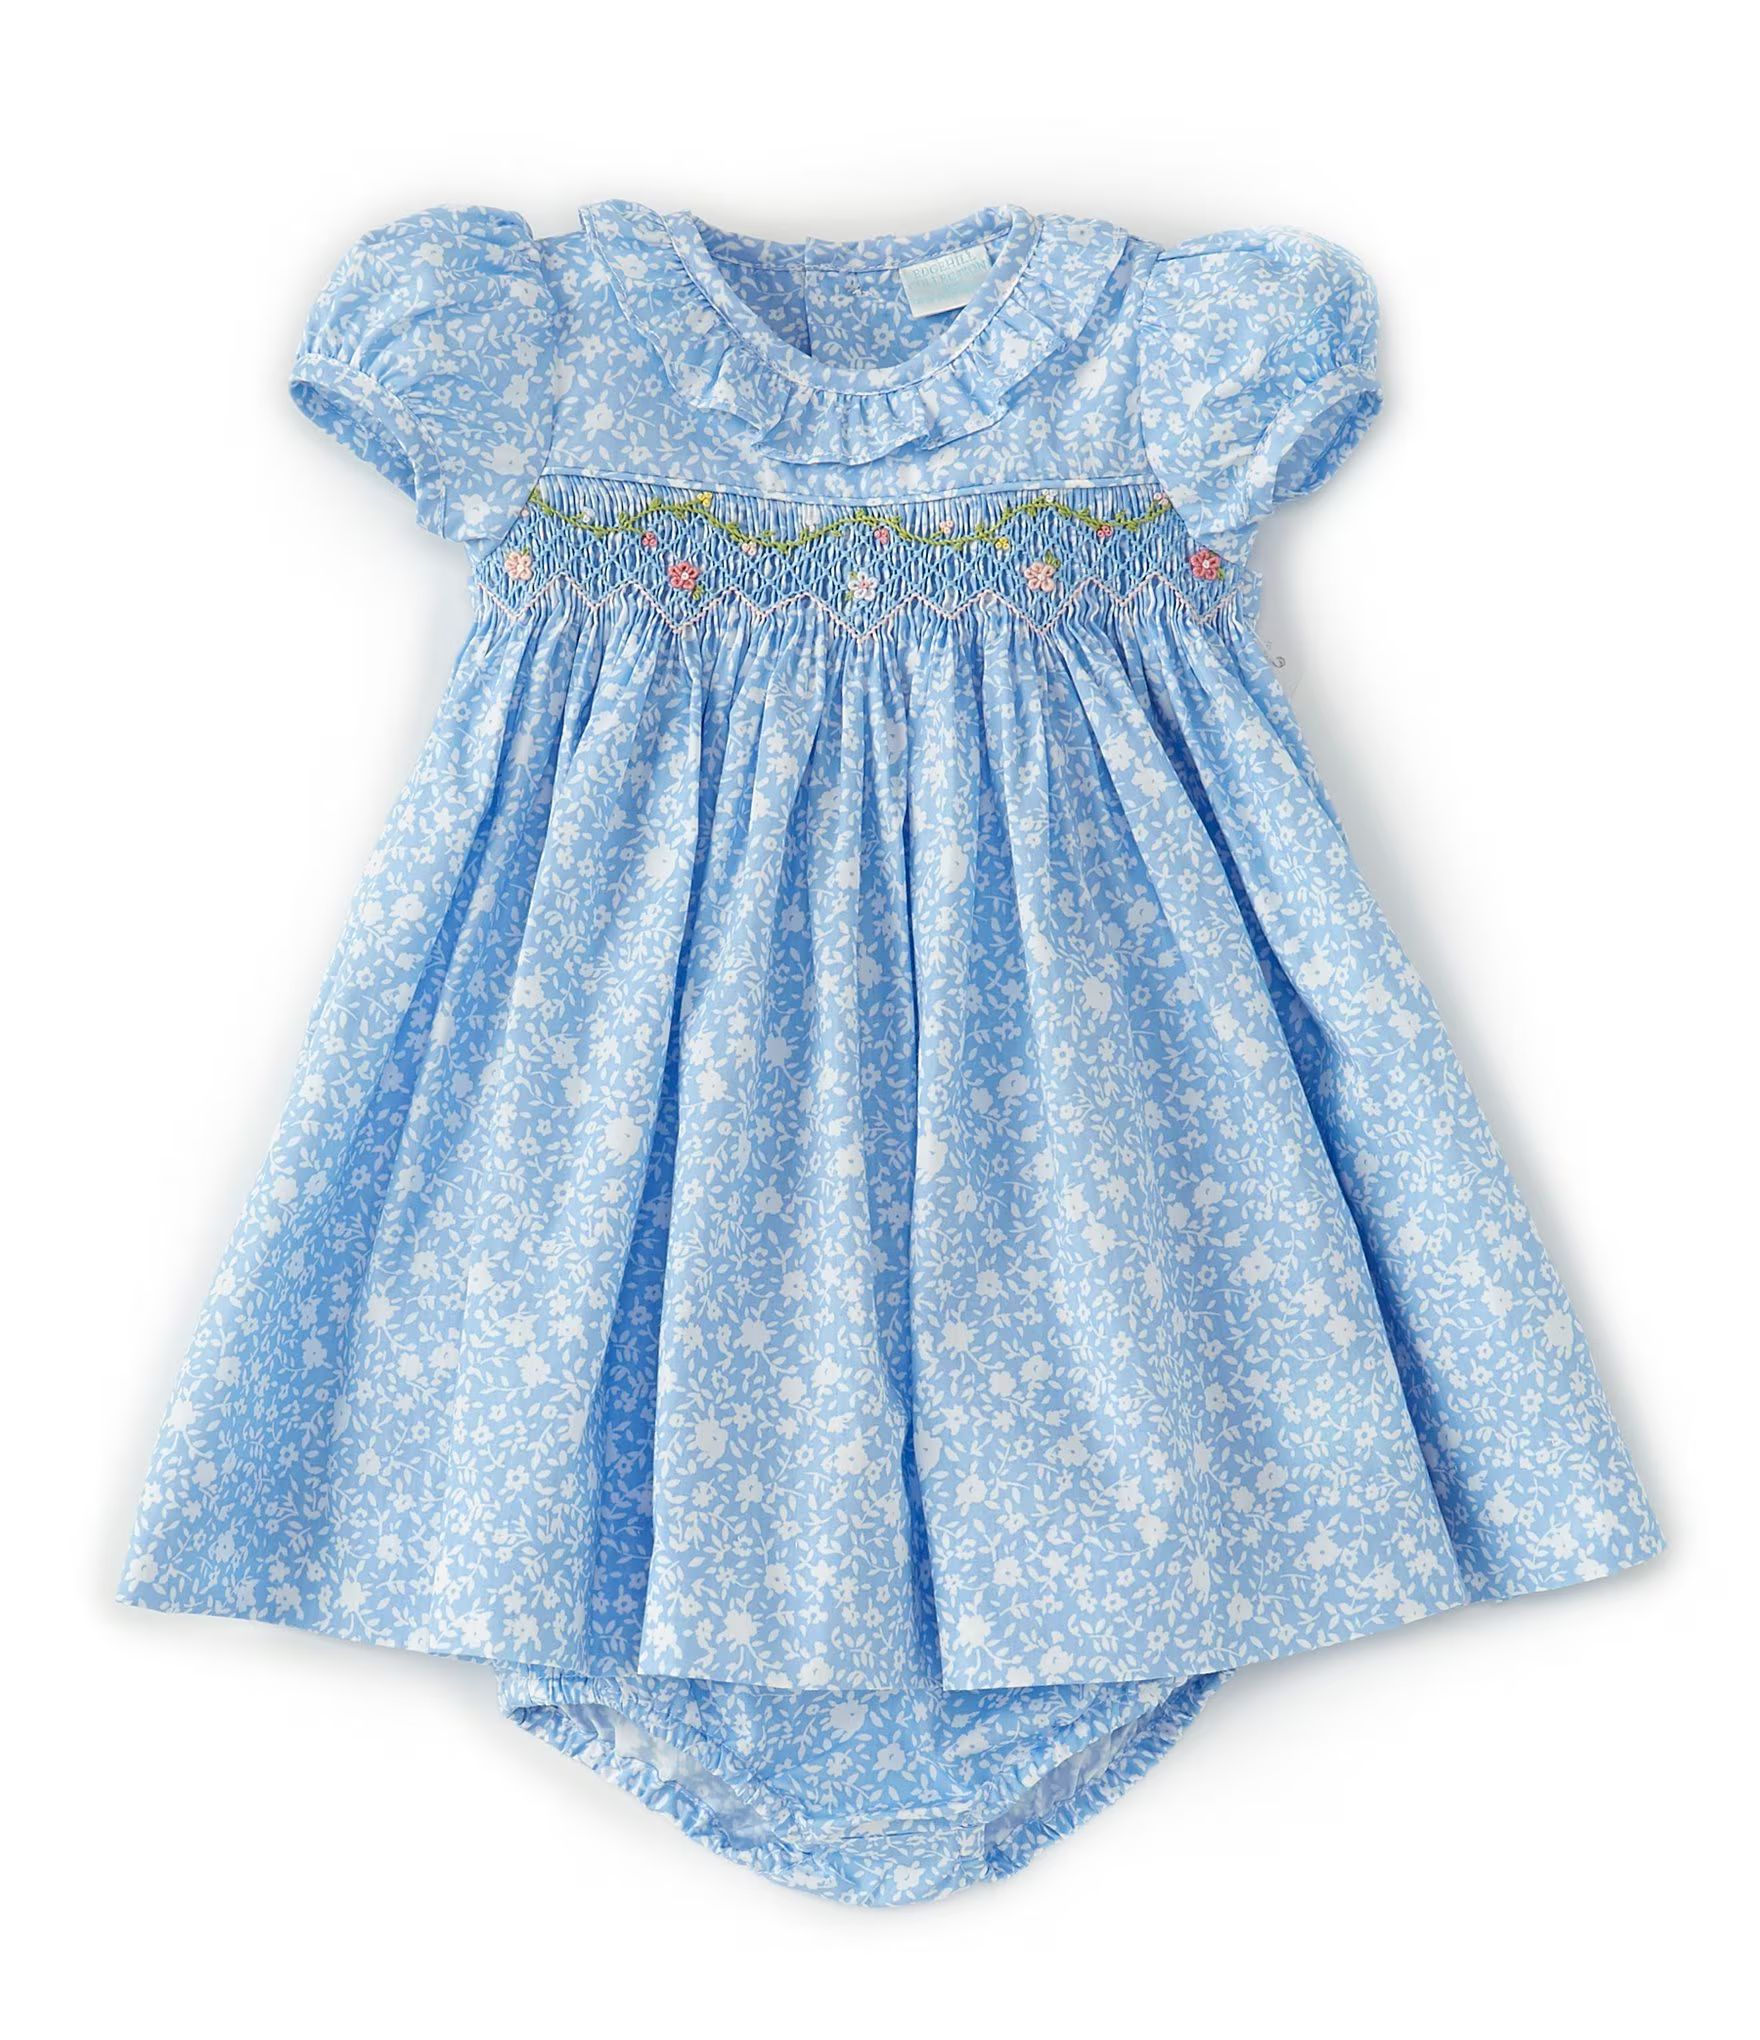 Baby Girls 3-24 Months Smocked Ditsy Floral A-Line Dress | Dillards